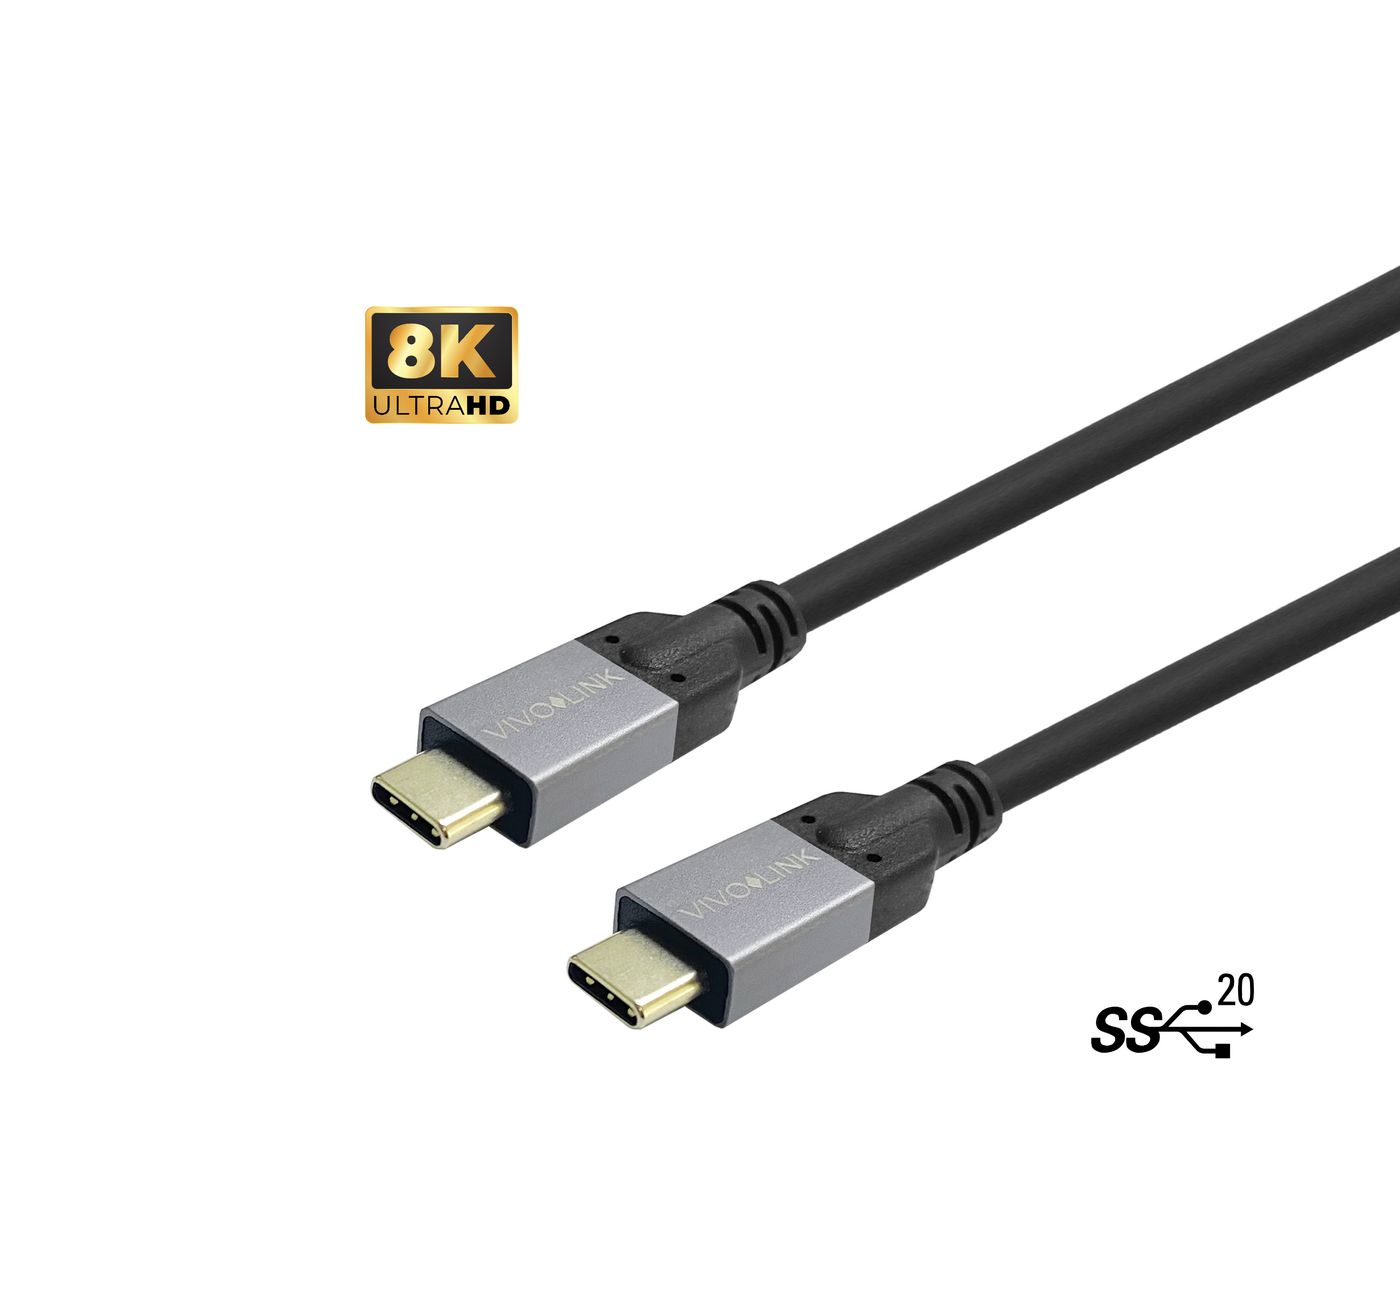 EET USB-C to Cable 4m Supports 20 Gbps data - Kabel - Digital/Daten (PROUSBCMM4)